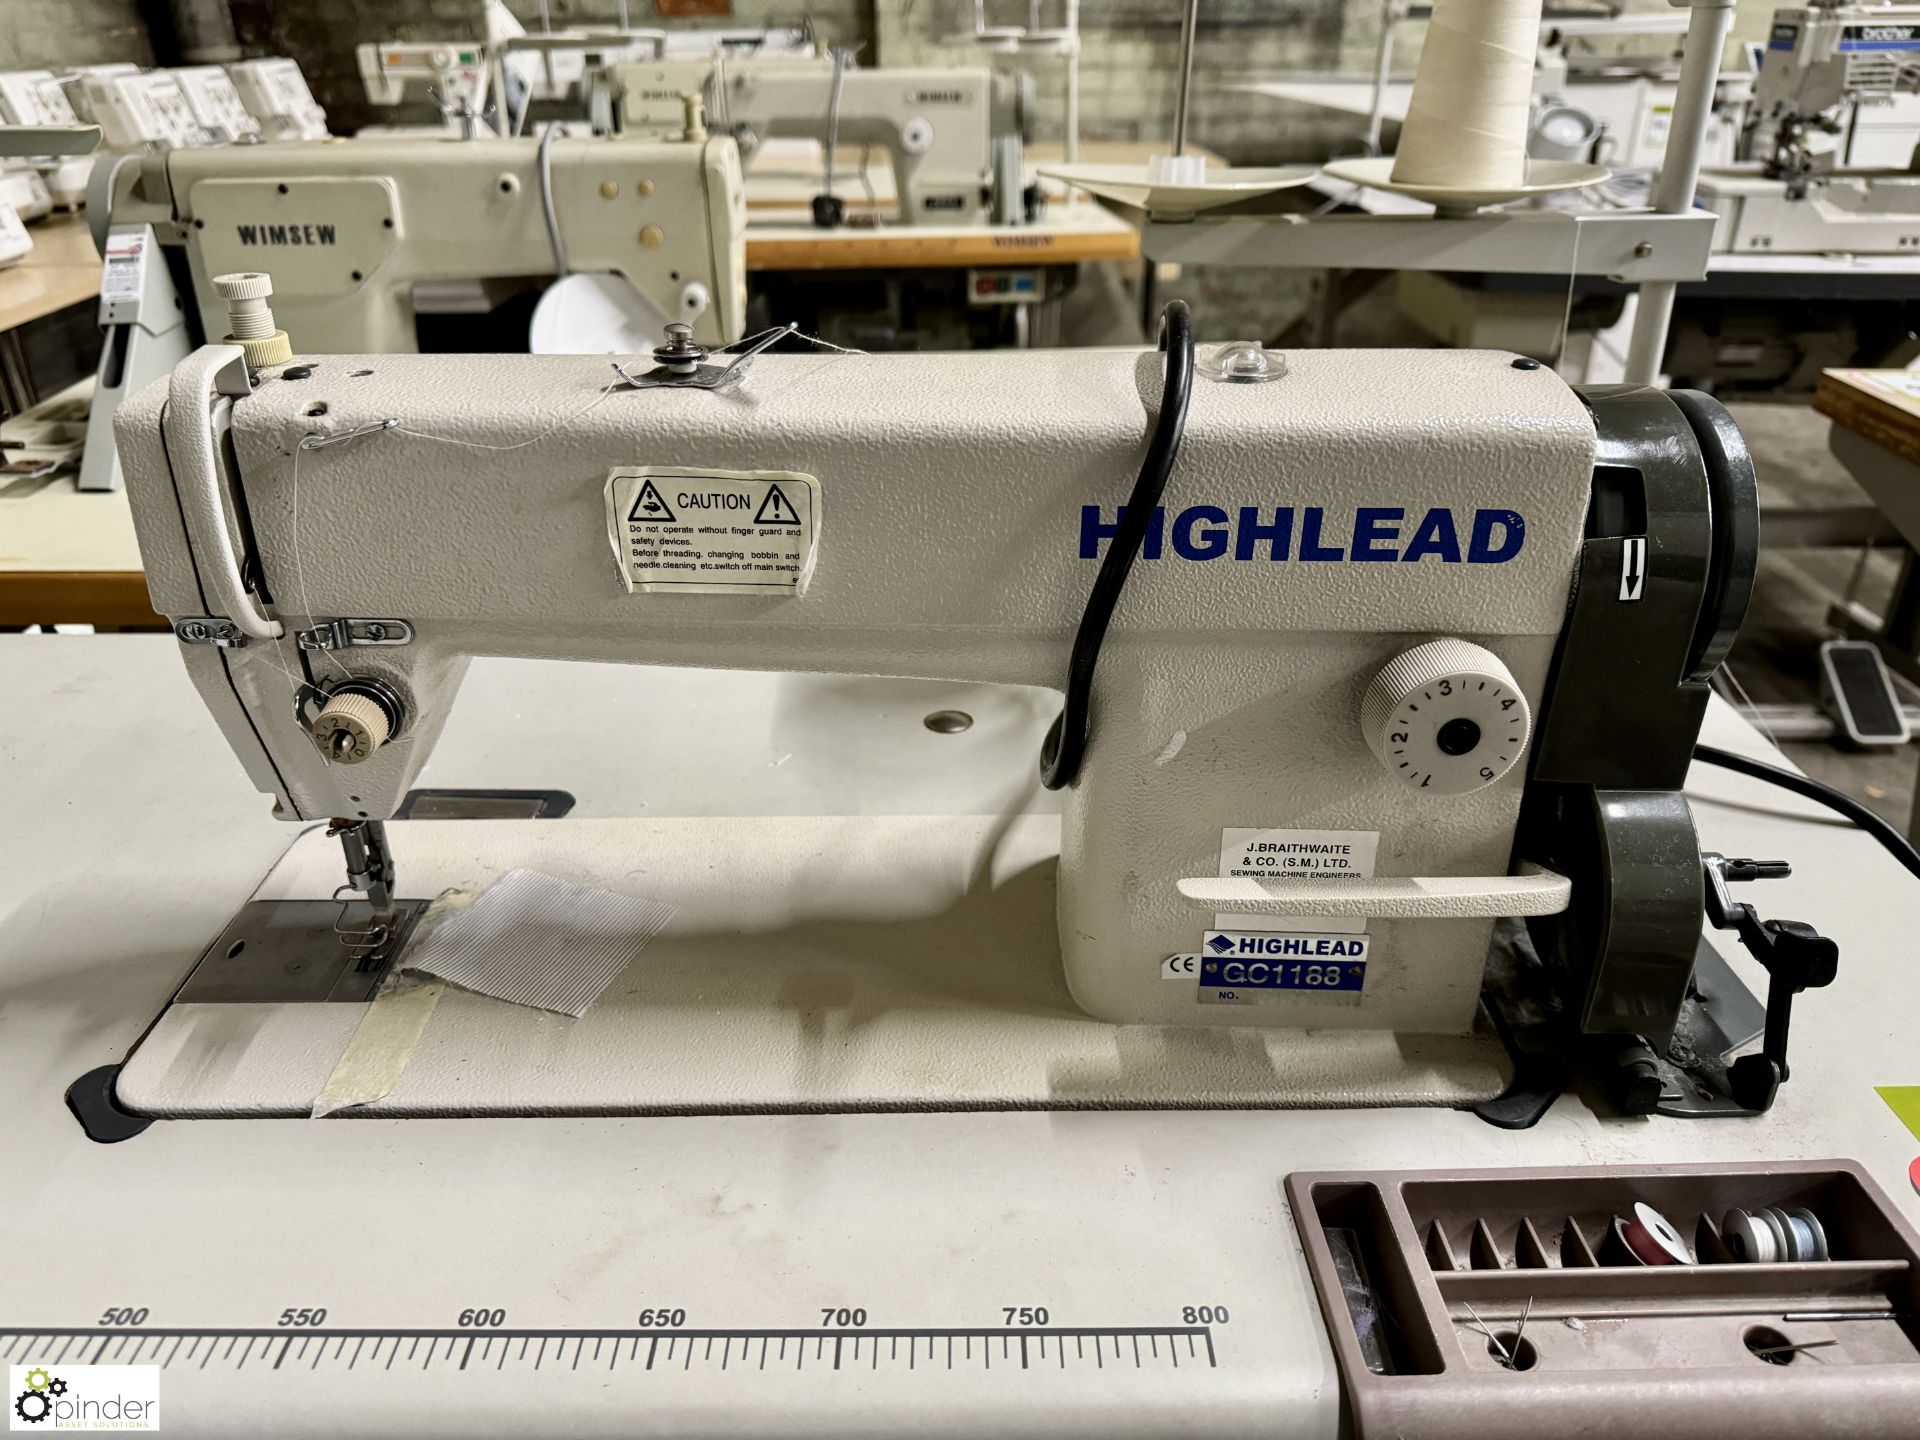 Highlead GC1188 flat bed Lockstitch, 240volts - Image 2 of 5